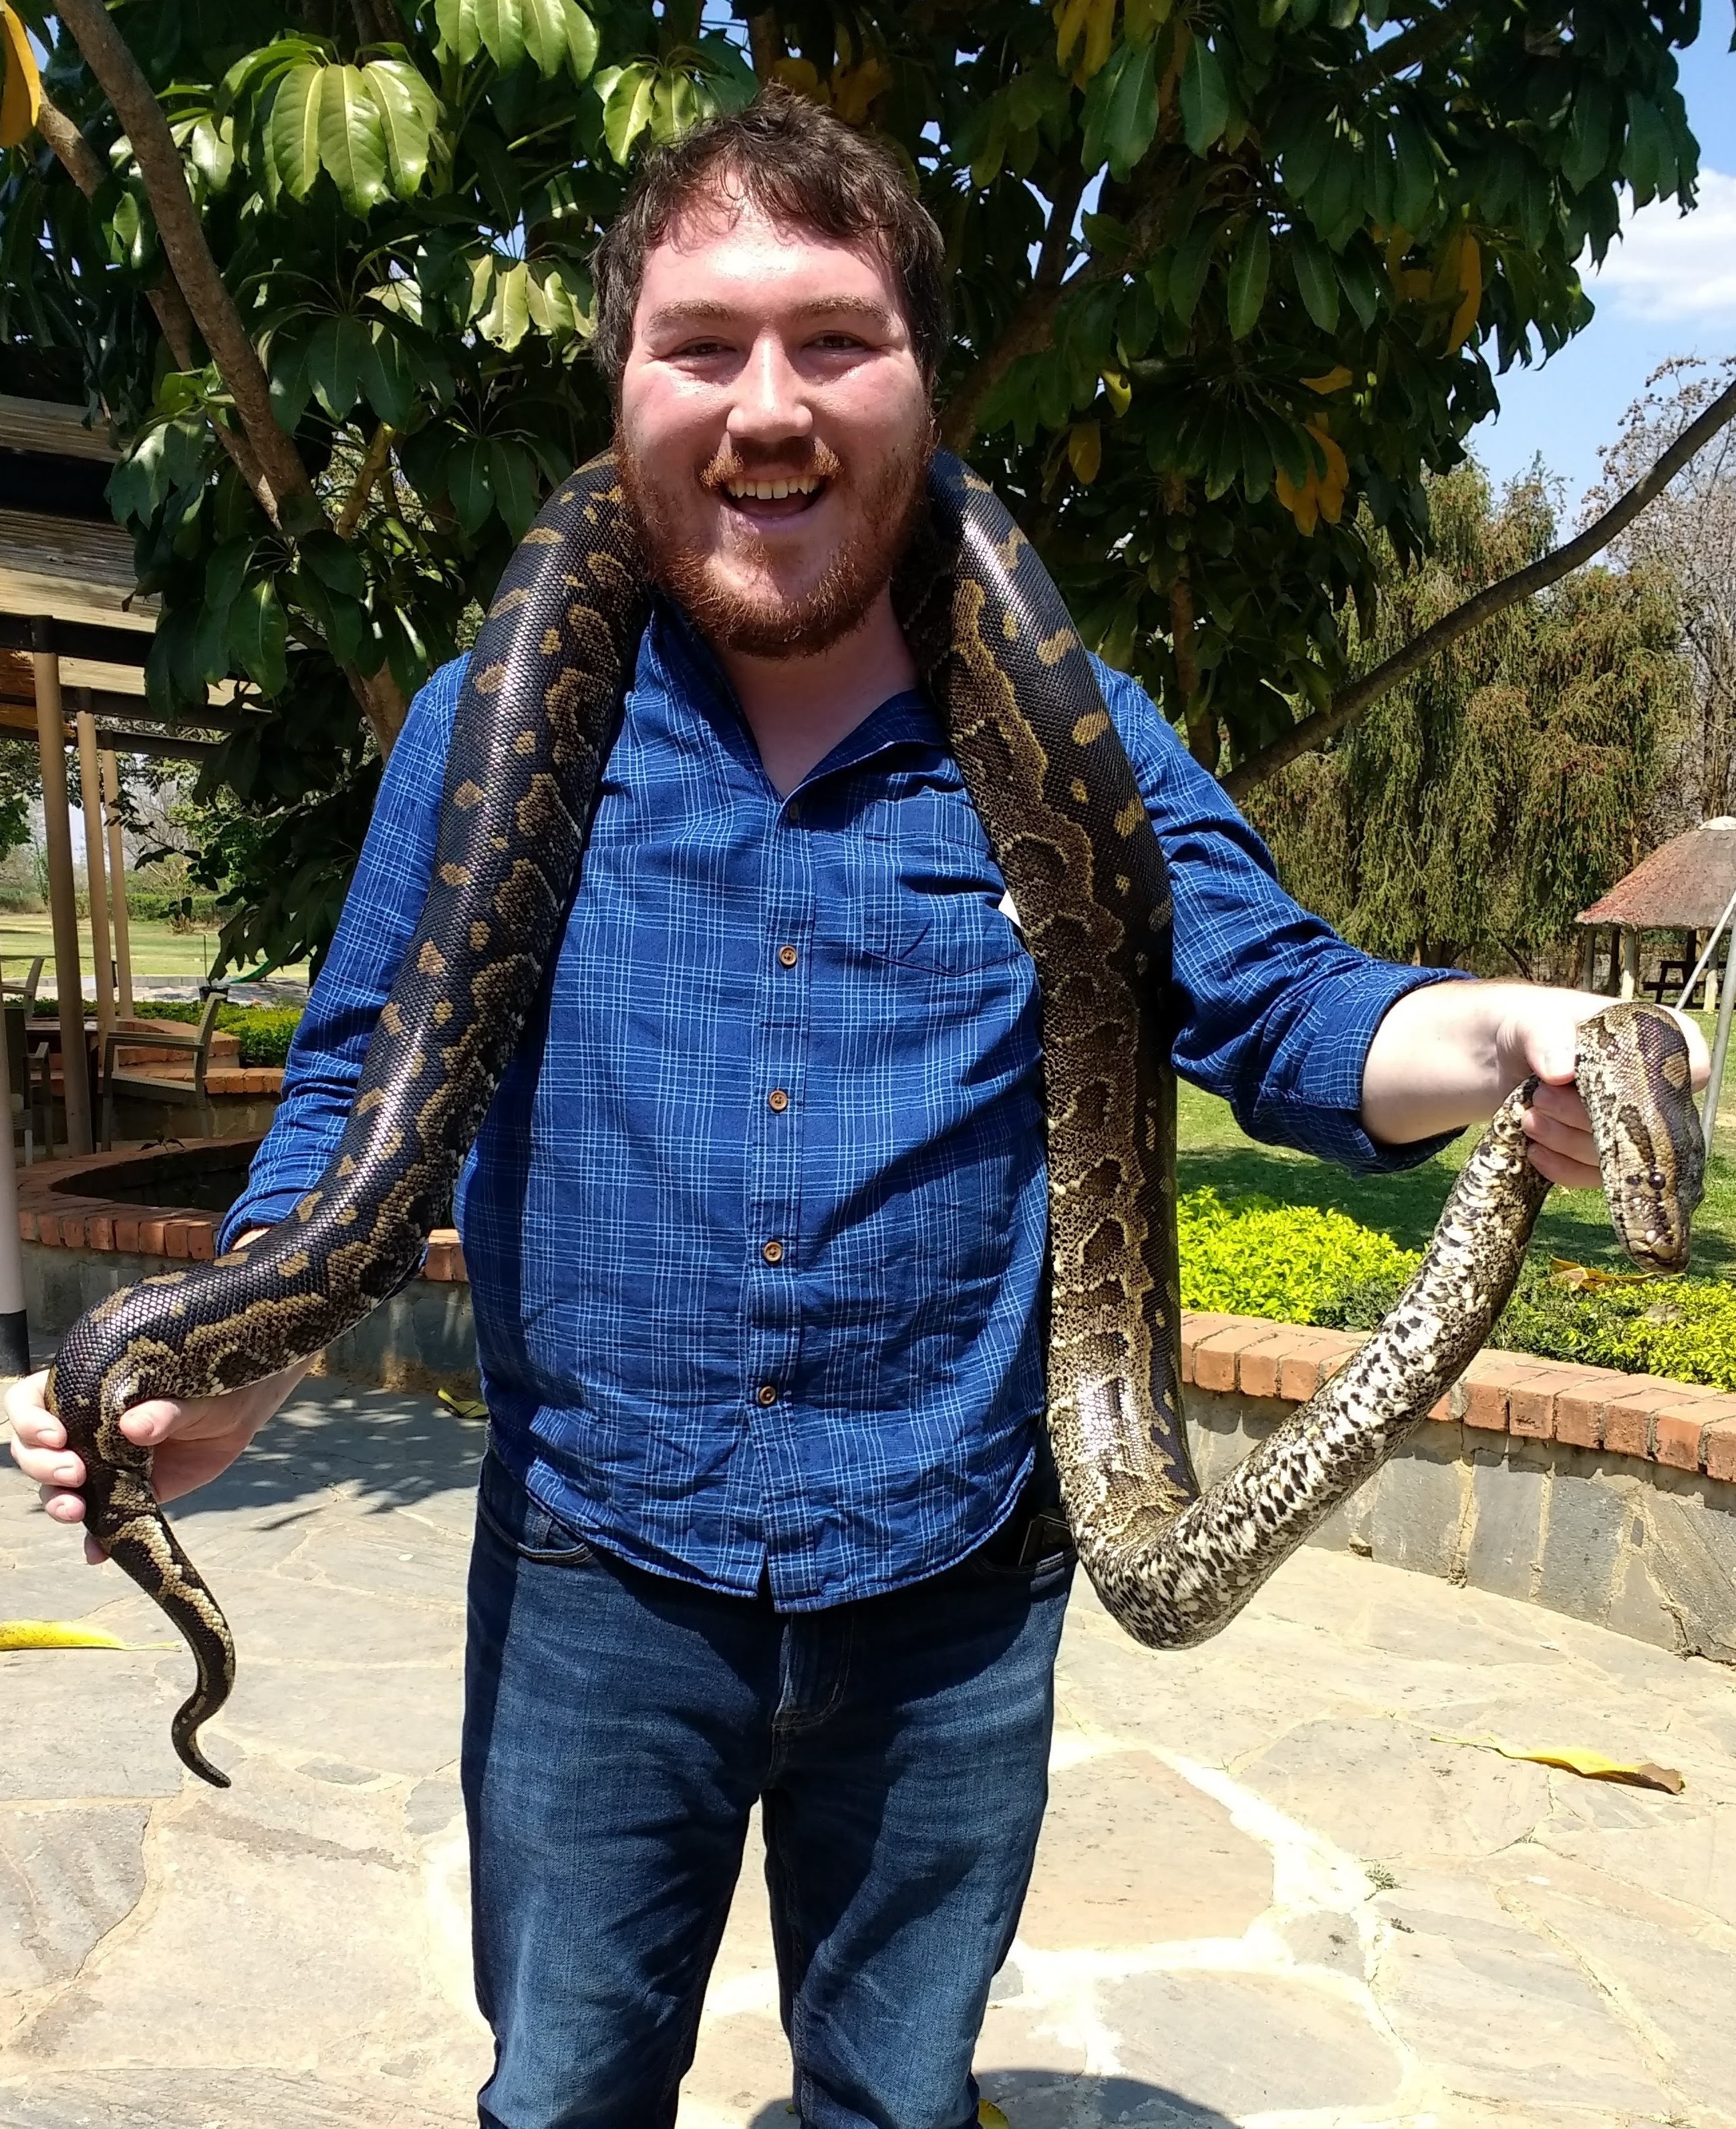 Miguel is one of our more adventurous YAVs. Here he is with a python around his neck. Teaching 5th grade will also be quite the adventure!